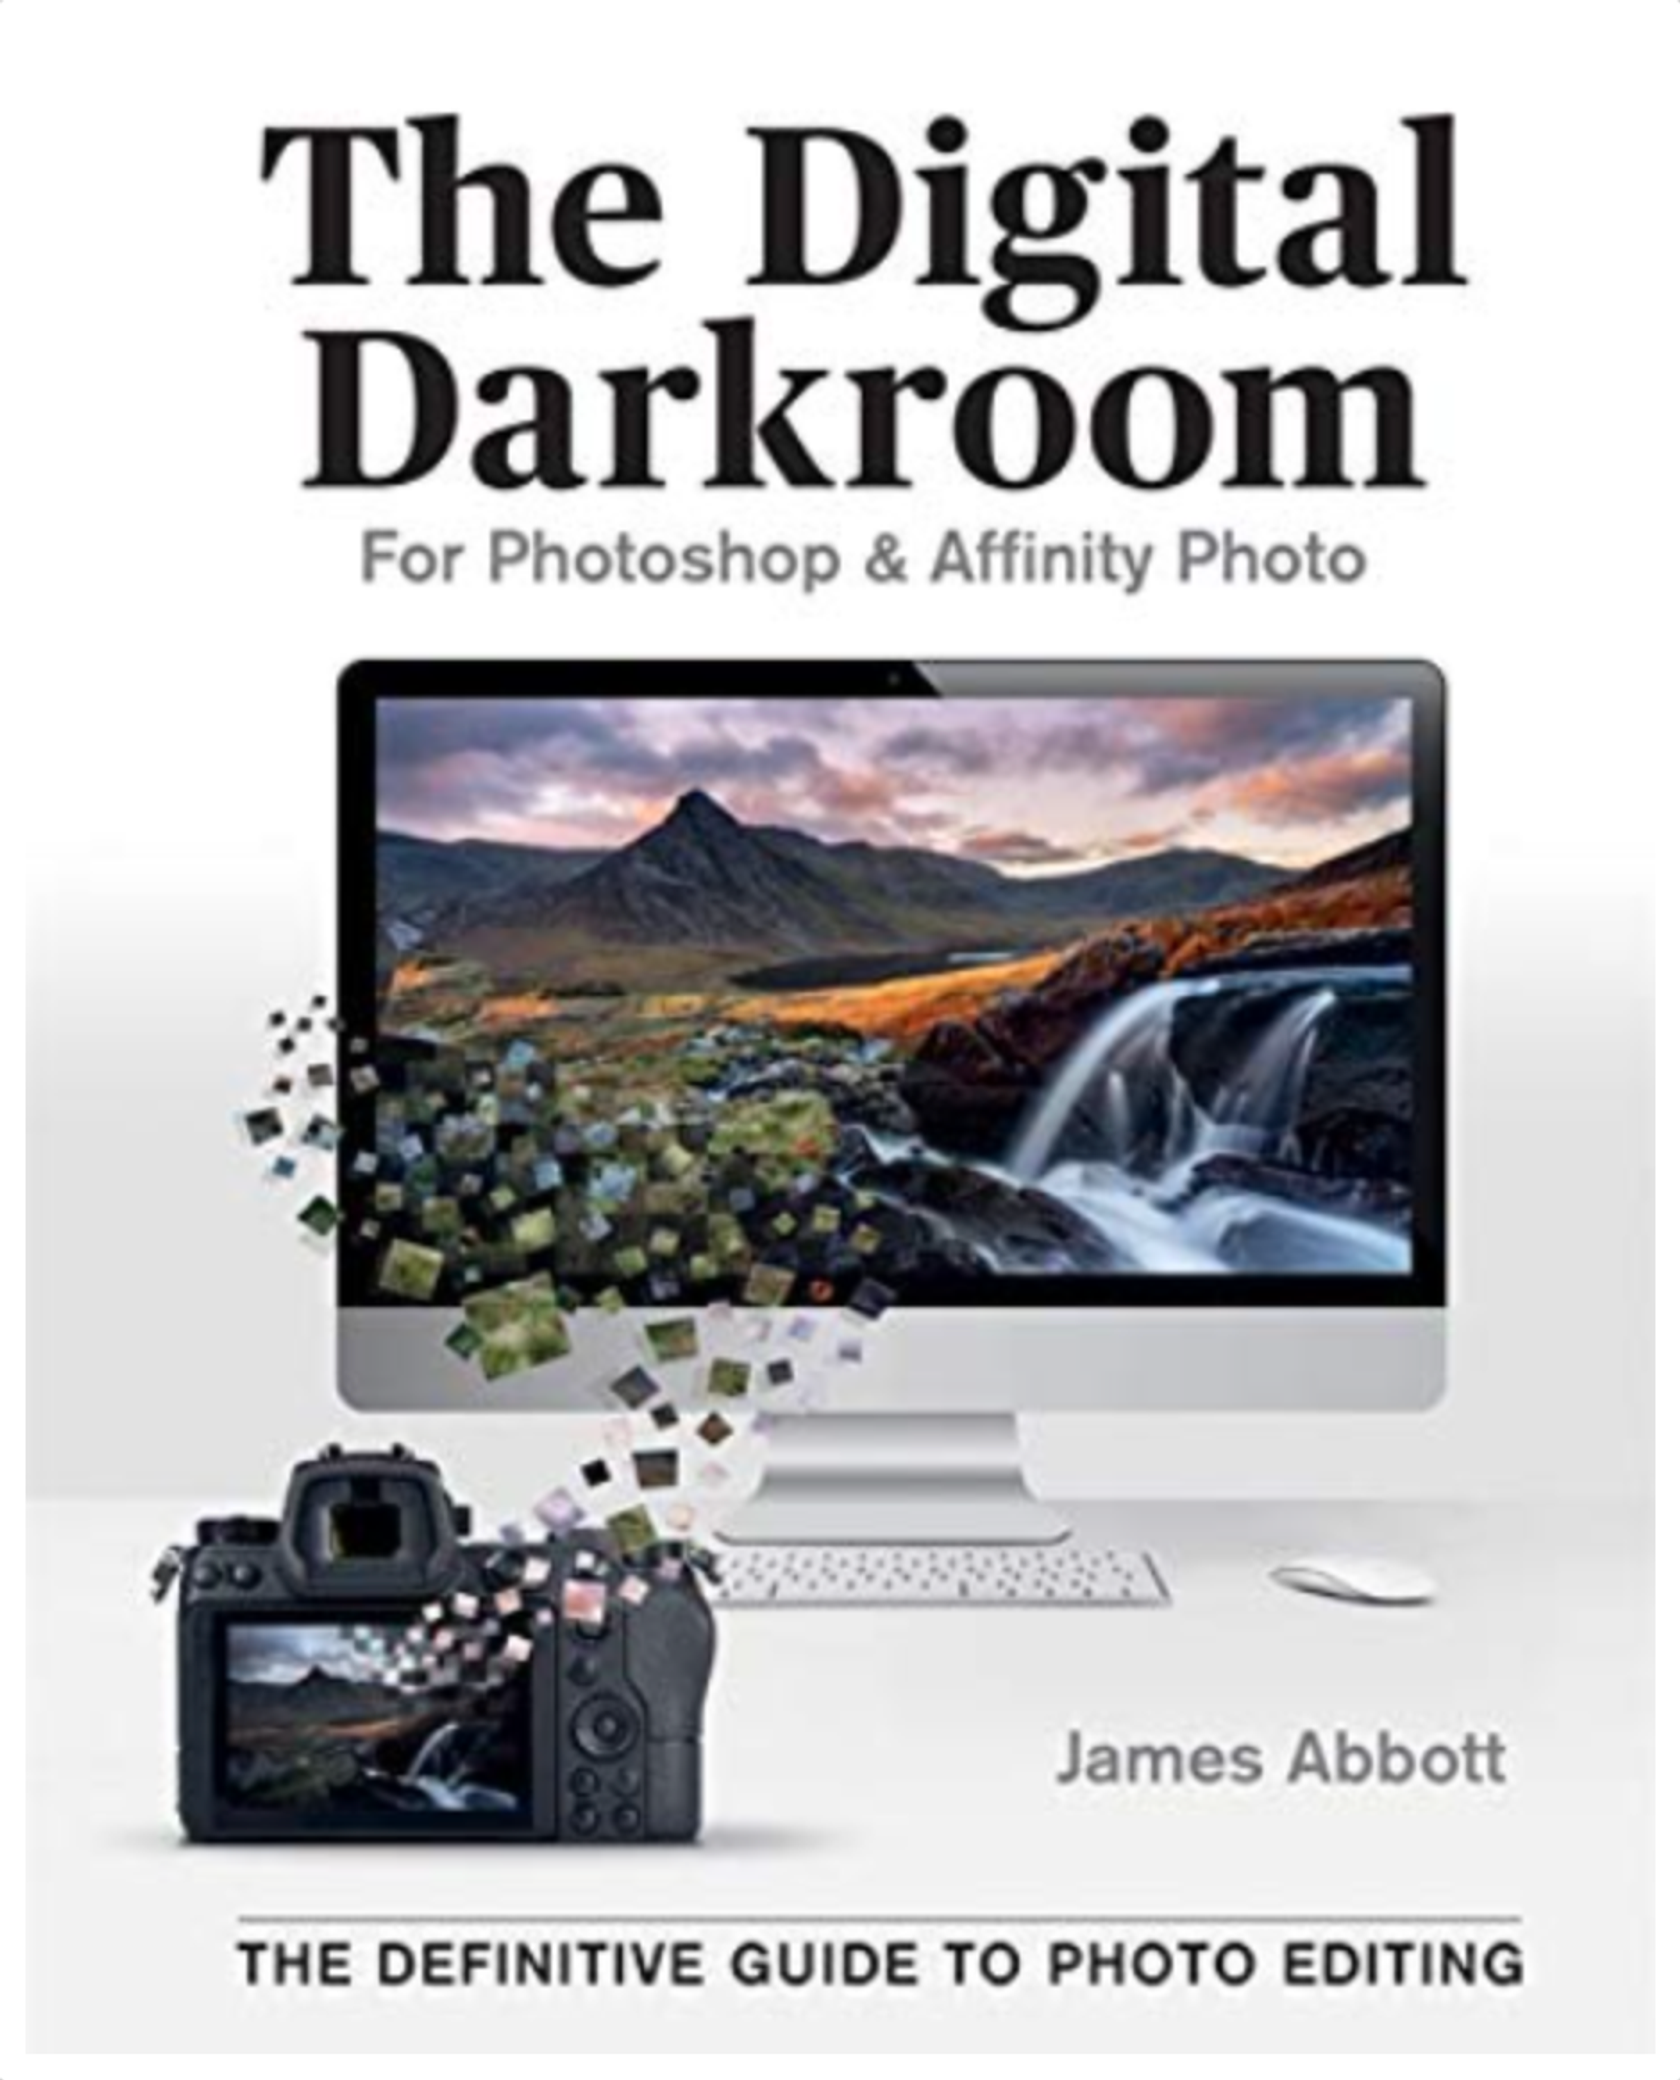 Photography E-book/workbook & Guide for Beginners Instant 